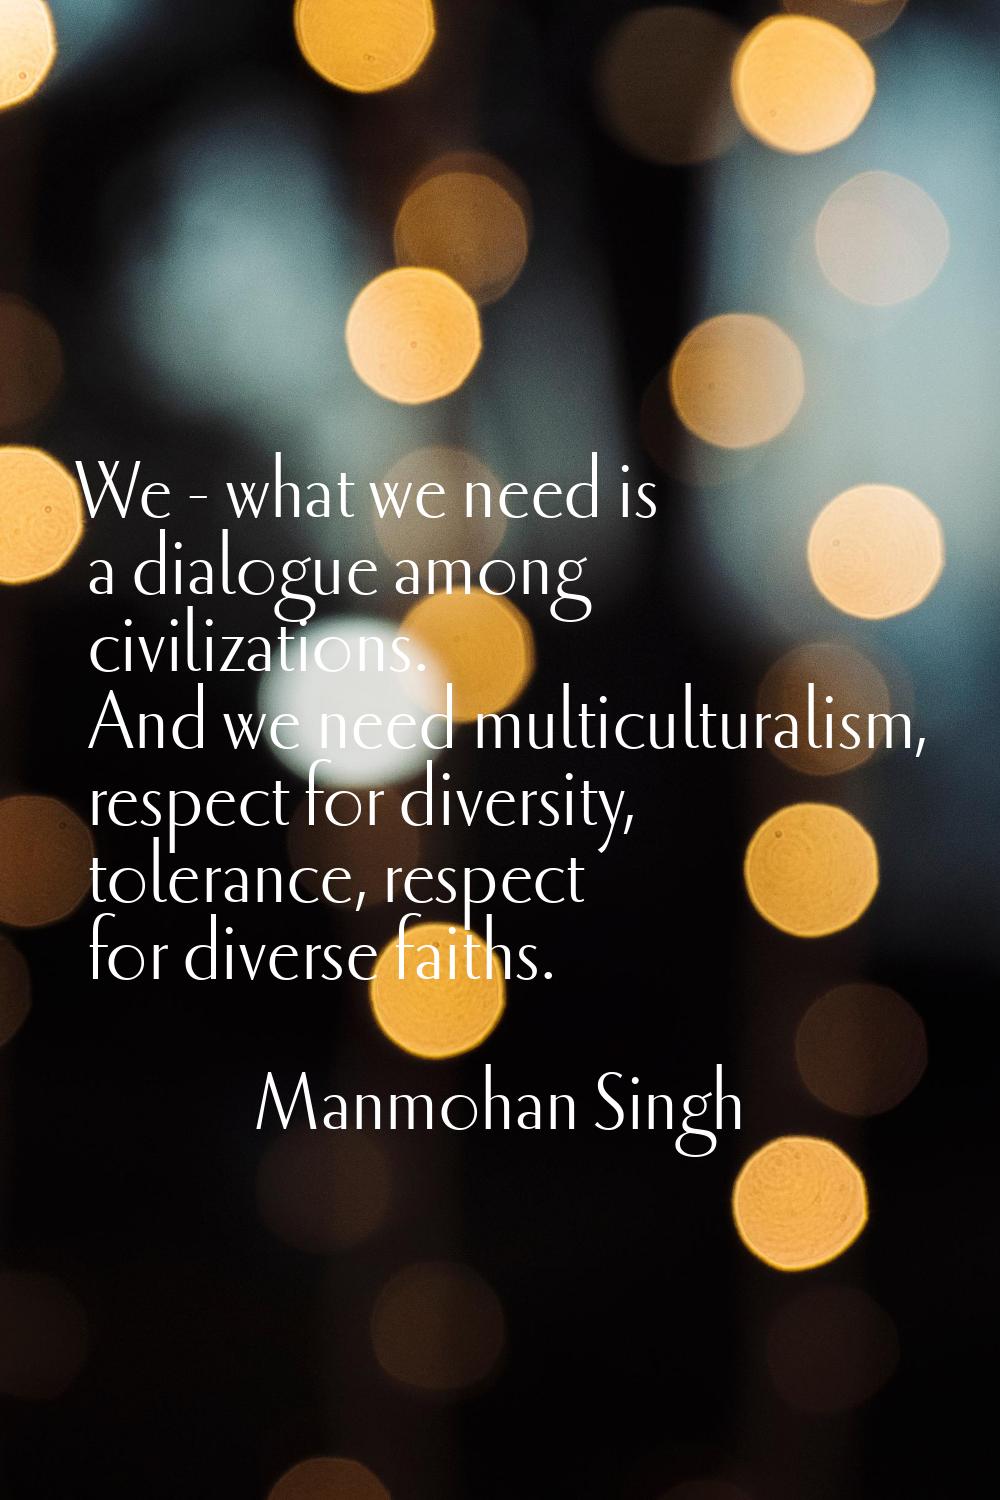 We - what we need is a dialogue among civilizations. And we need multiculturalism, respect for dive